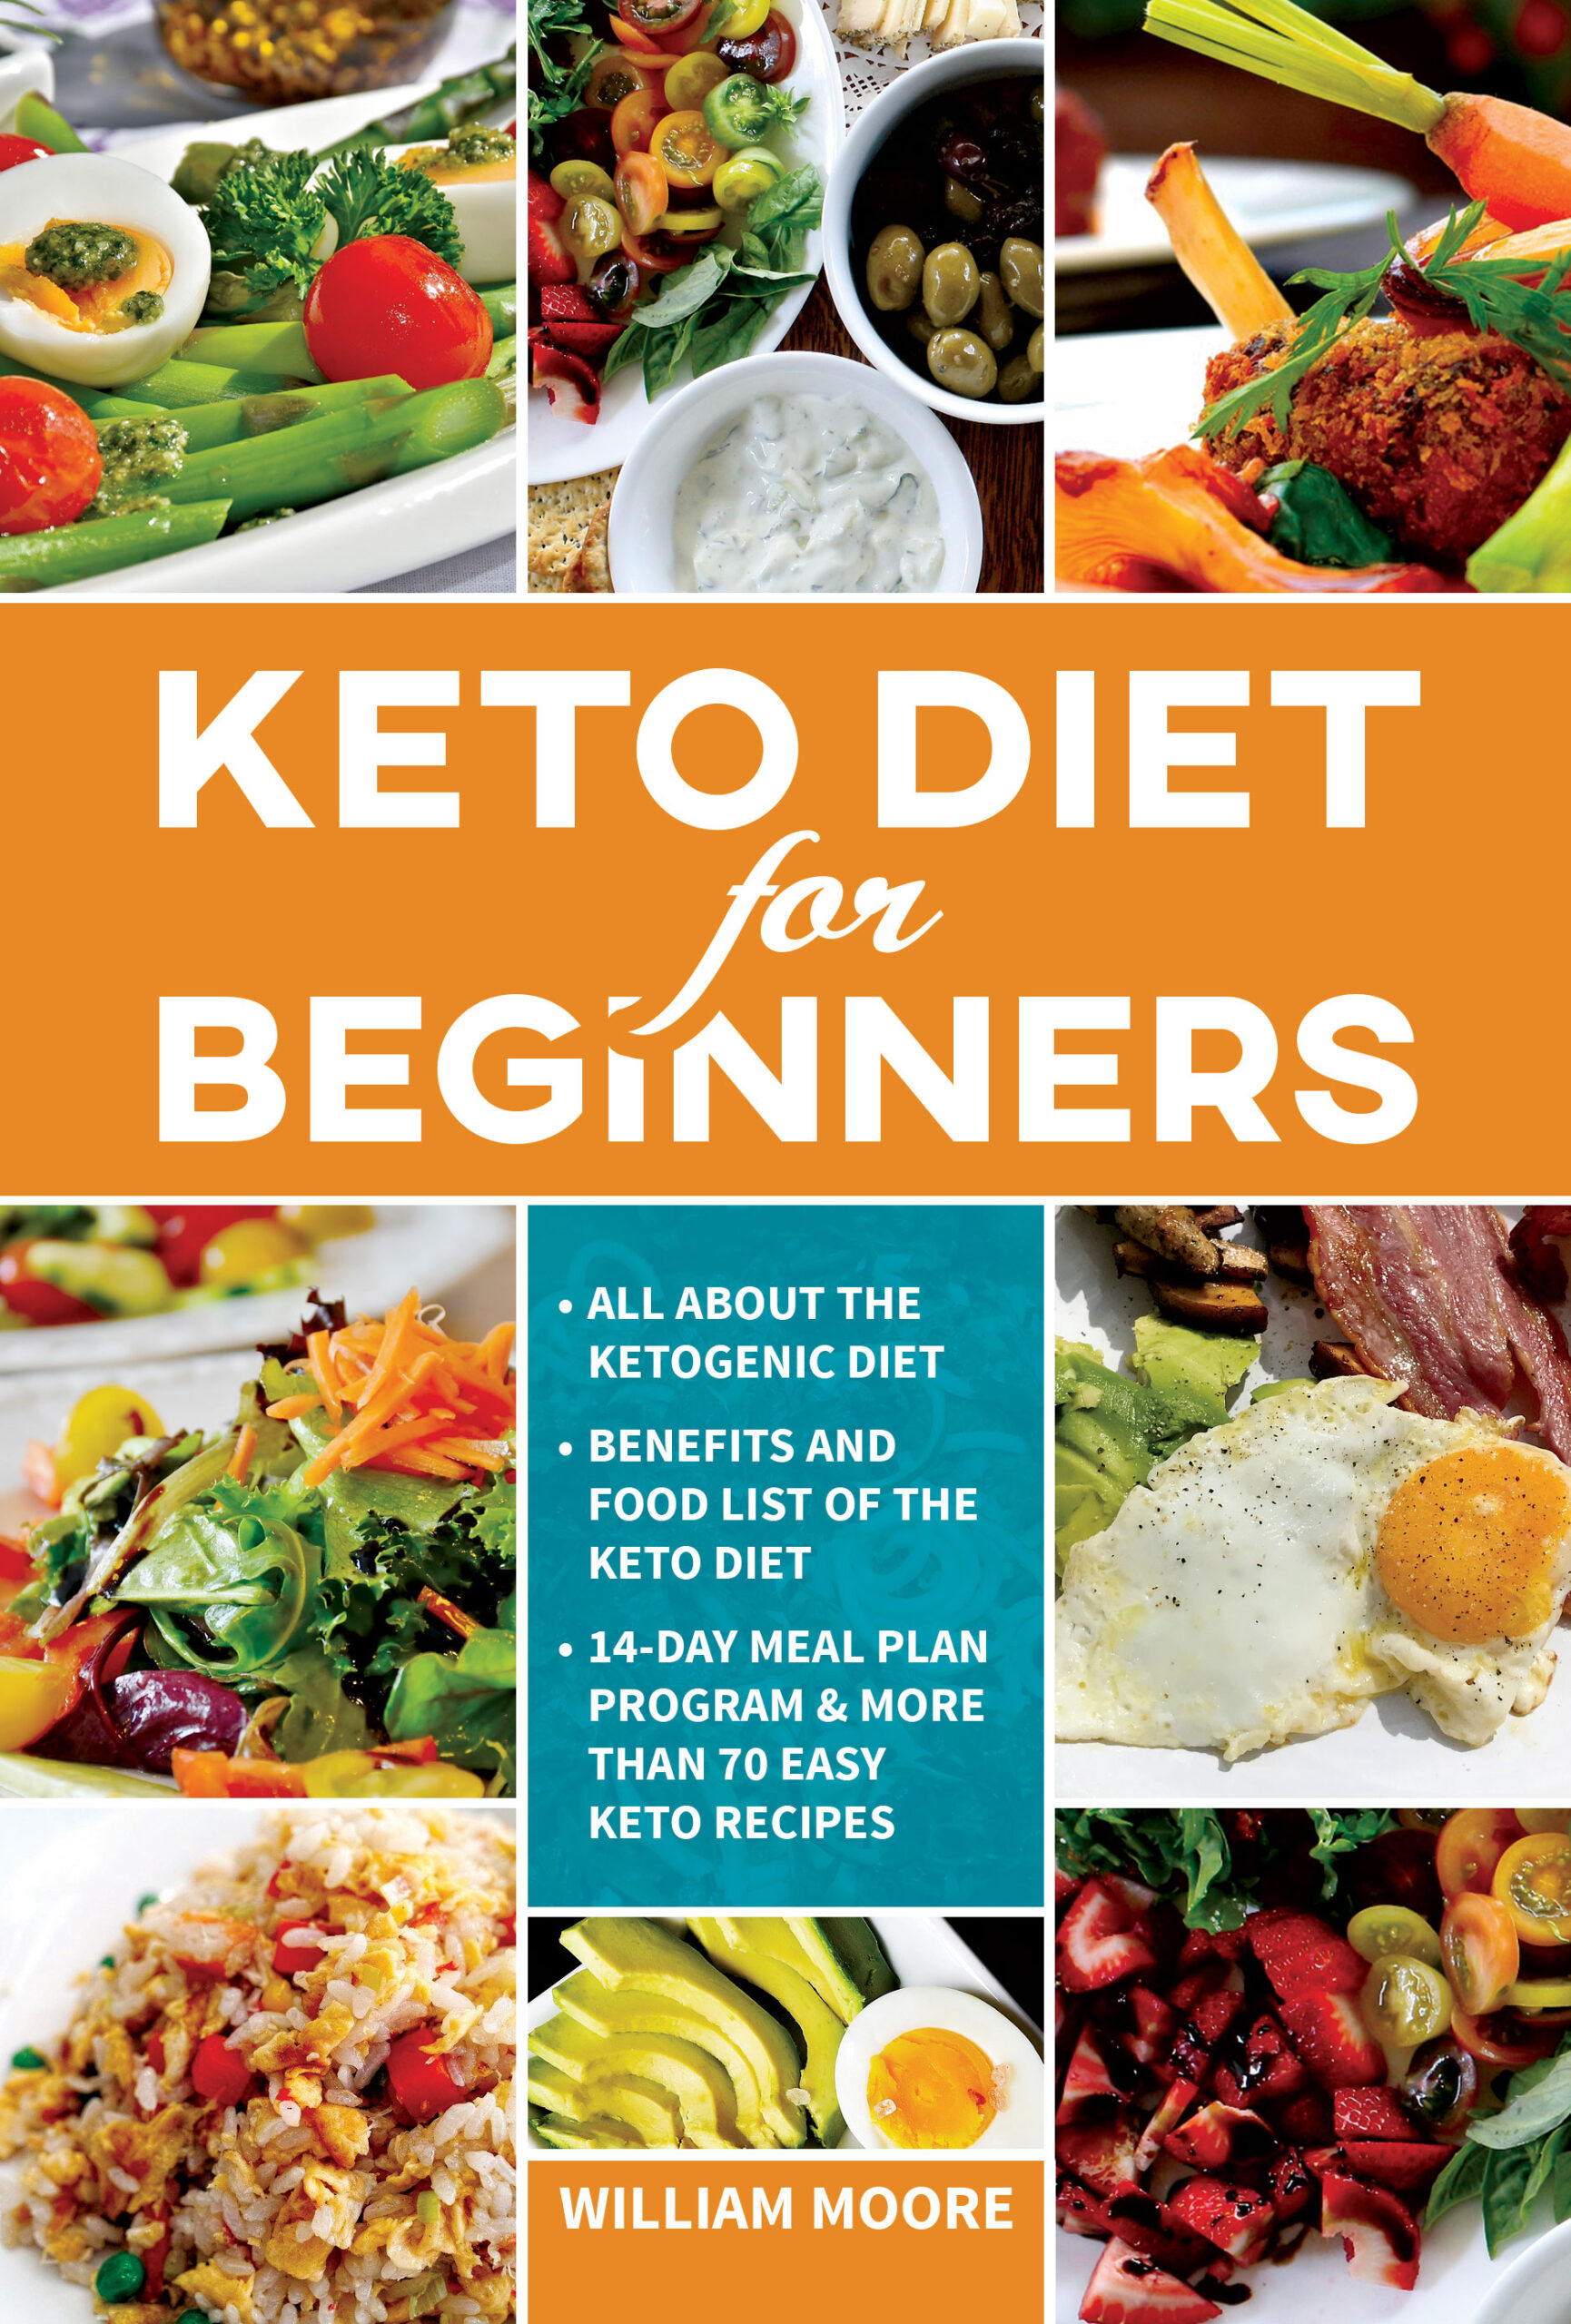 FREE: Keto Diet for Beginners by William Moore